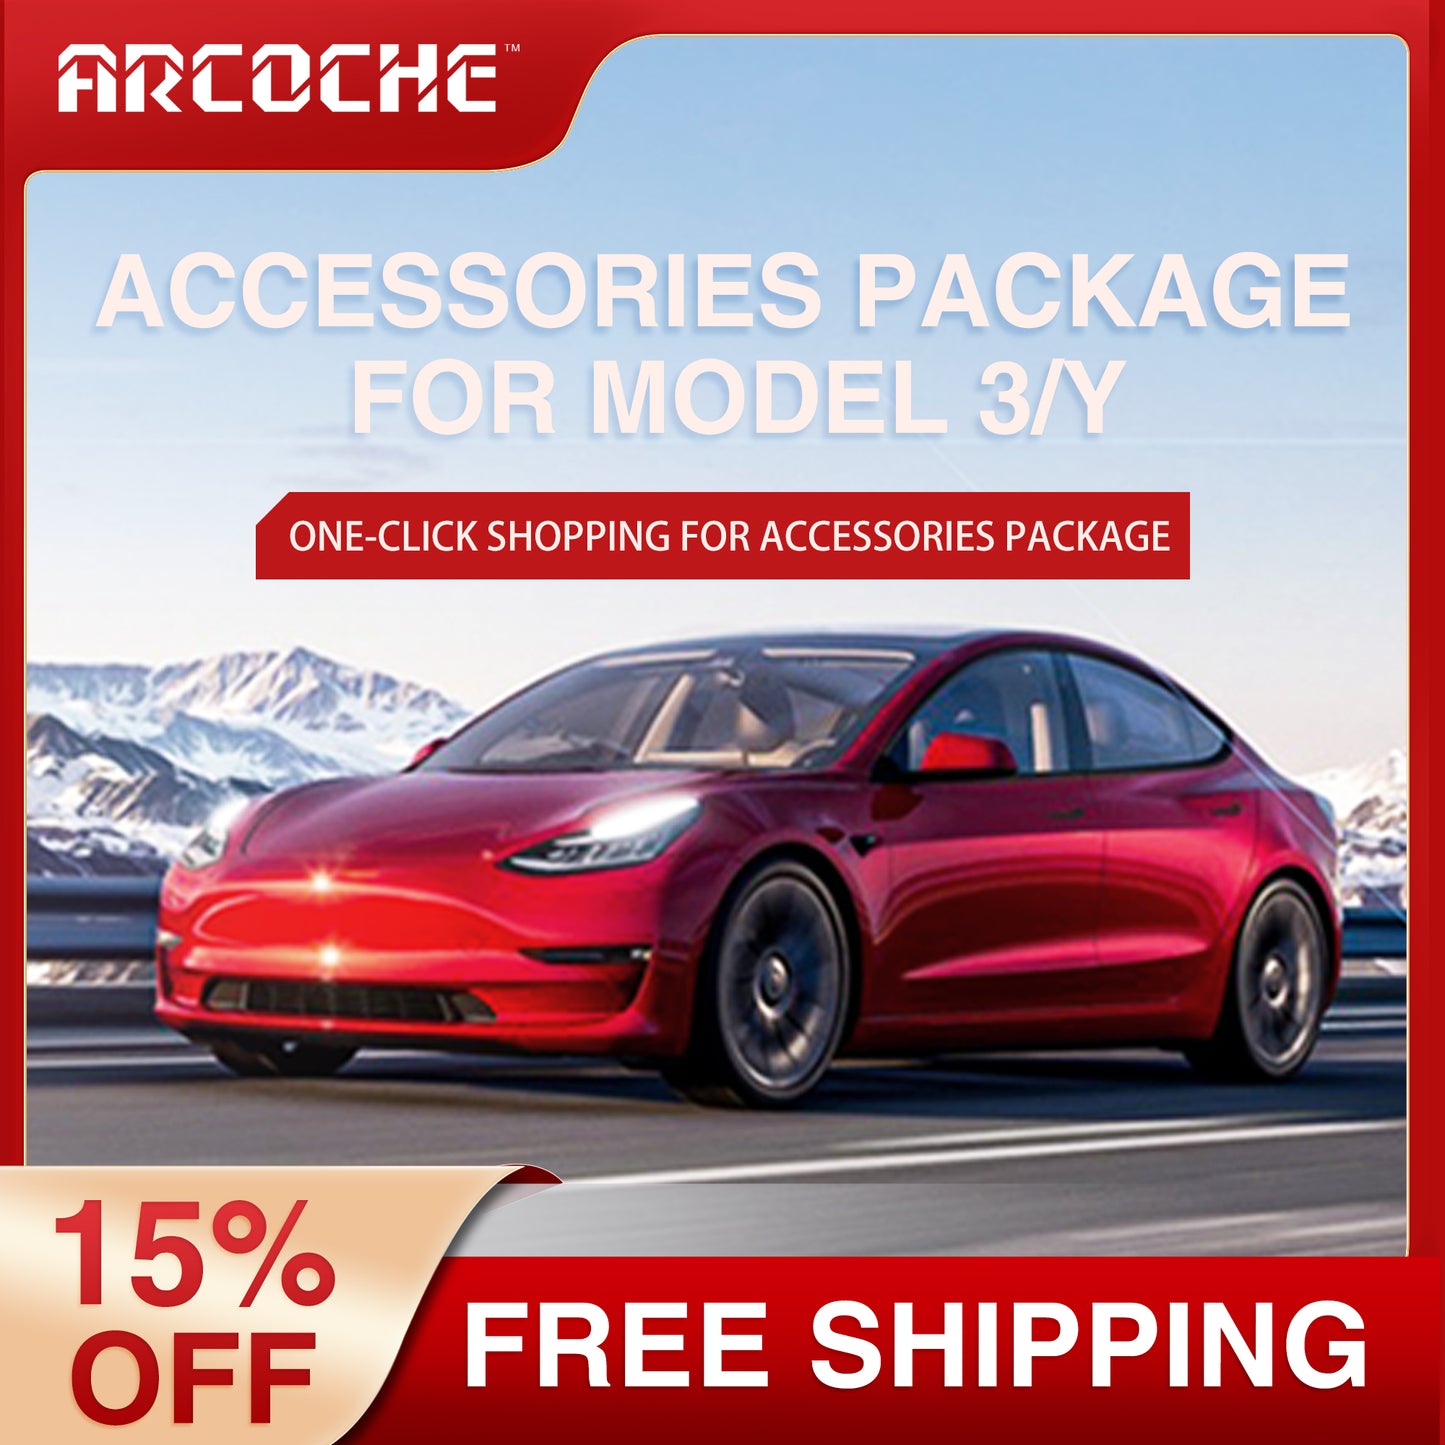 tesla model 3 Y car 2022 2023 2021 2020 2019 2018 s3xy Accessories Sets applicable to Model 3/Y Owners arcoche accessories accessory aftermarket price Vehicles standard long range performance sr+ electric car rwd ev interior exterior diy decoration price elon musk must have black white red blue 5 7 seats seat